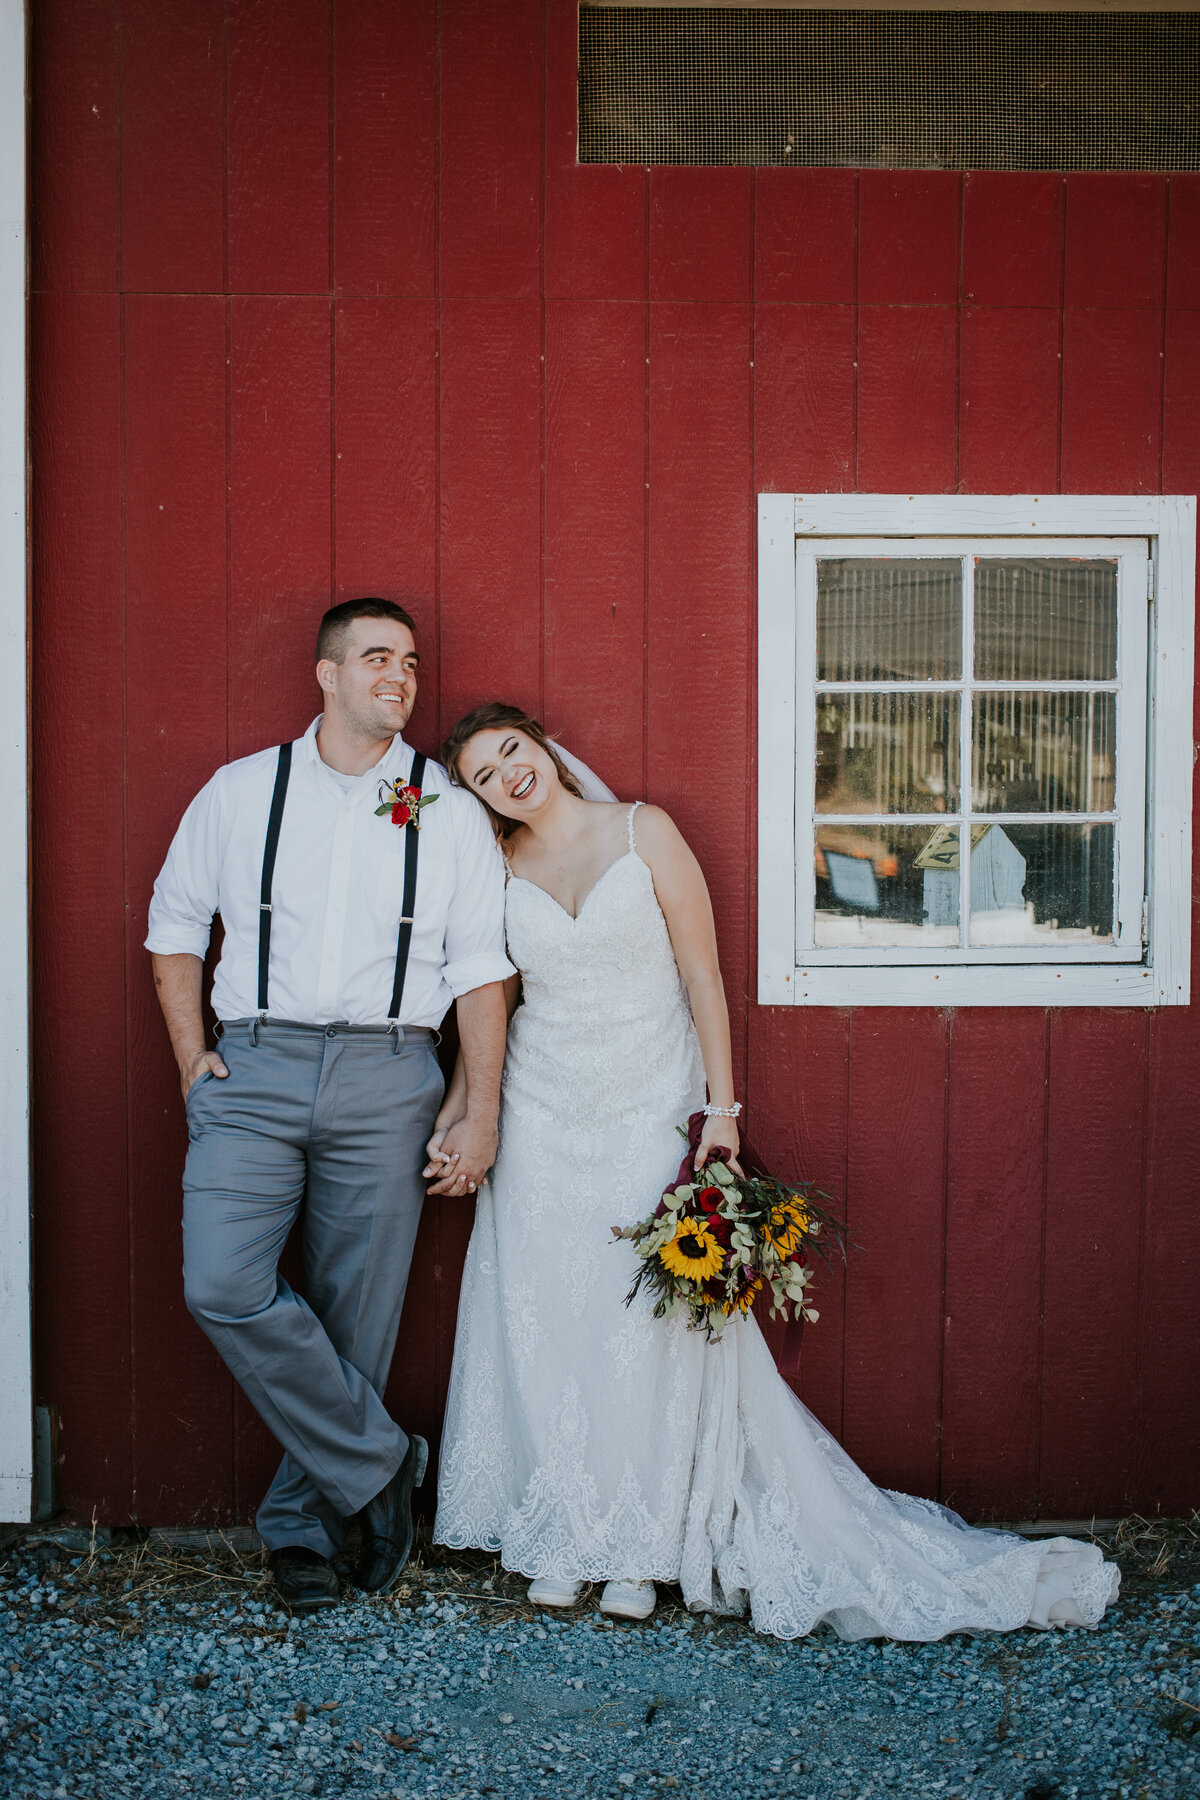 Standing in front of red barn, bride leans on grooms shoulder as they hold hands and smile.